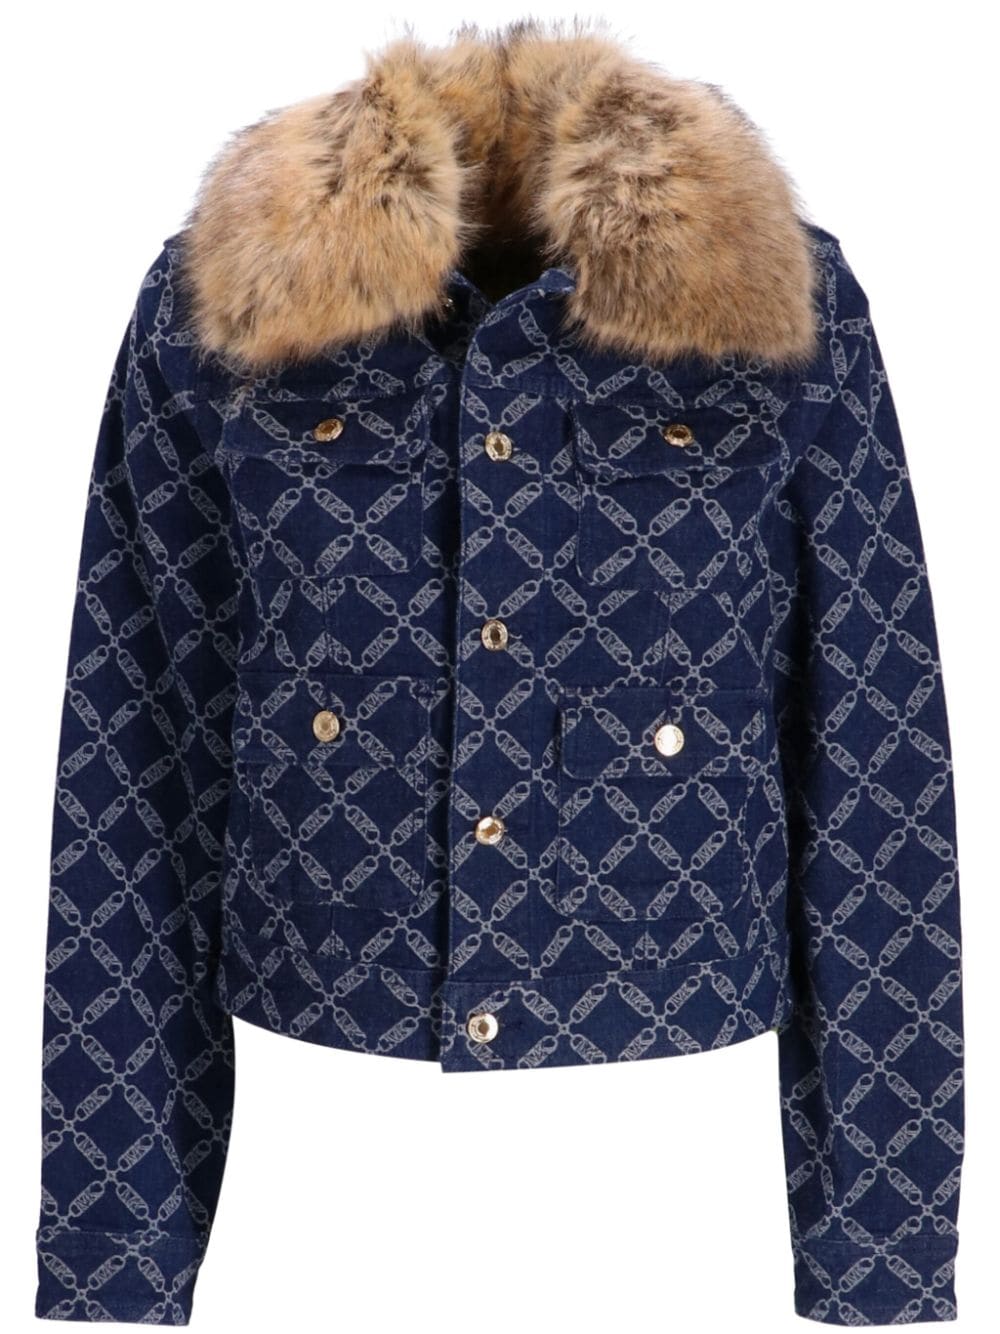 LOUIS VUITTON Hooded Denim Jacket - More Than You Can Imagine